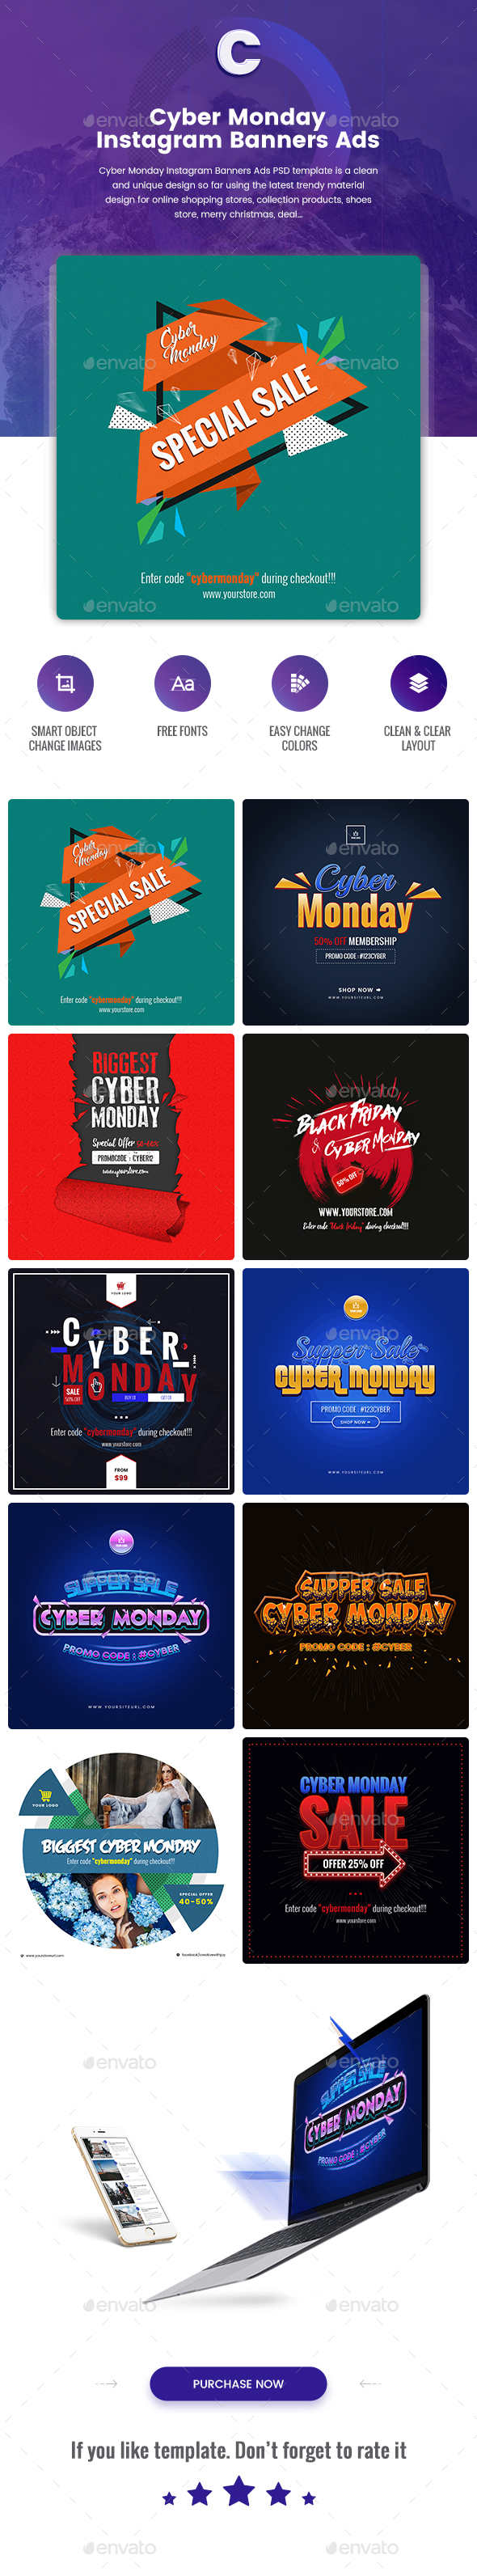 Cyber Monday Instagram Banners Ads - 10 PSD [NewSize]